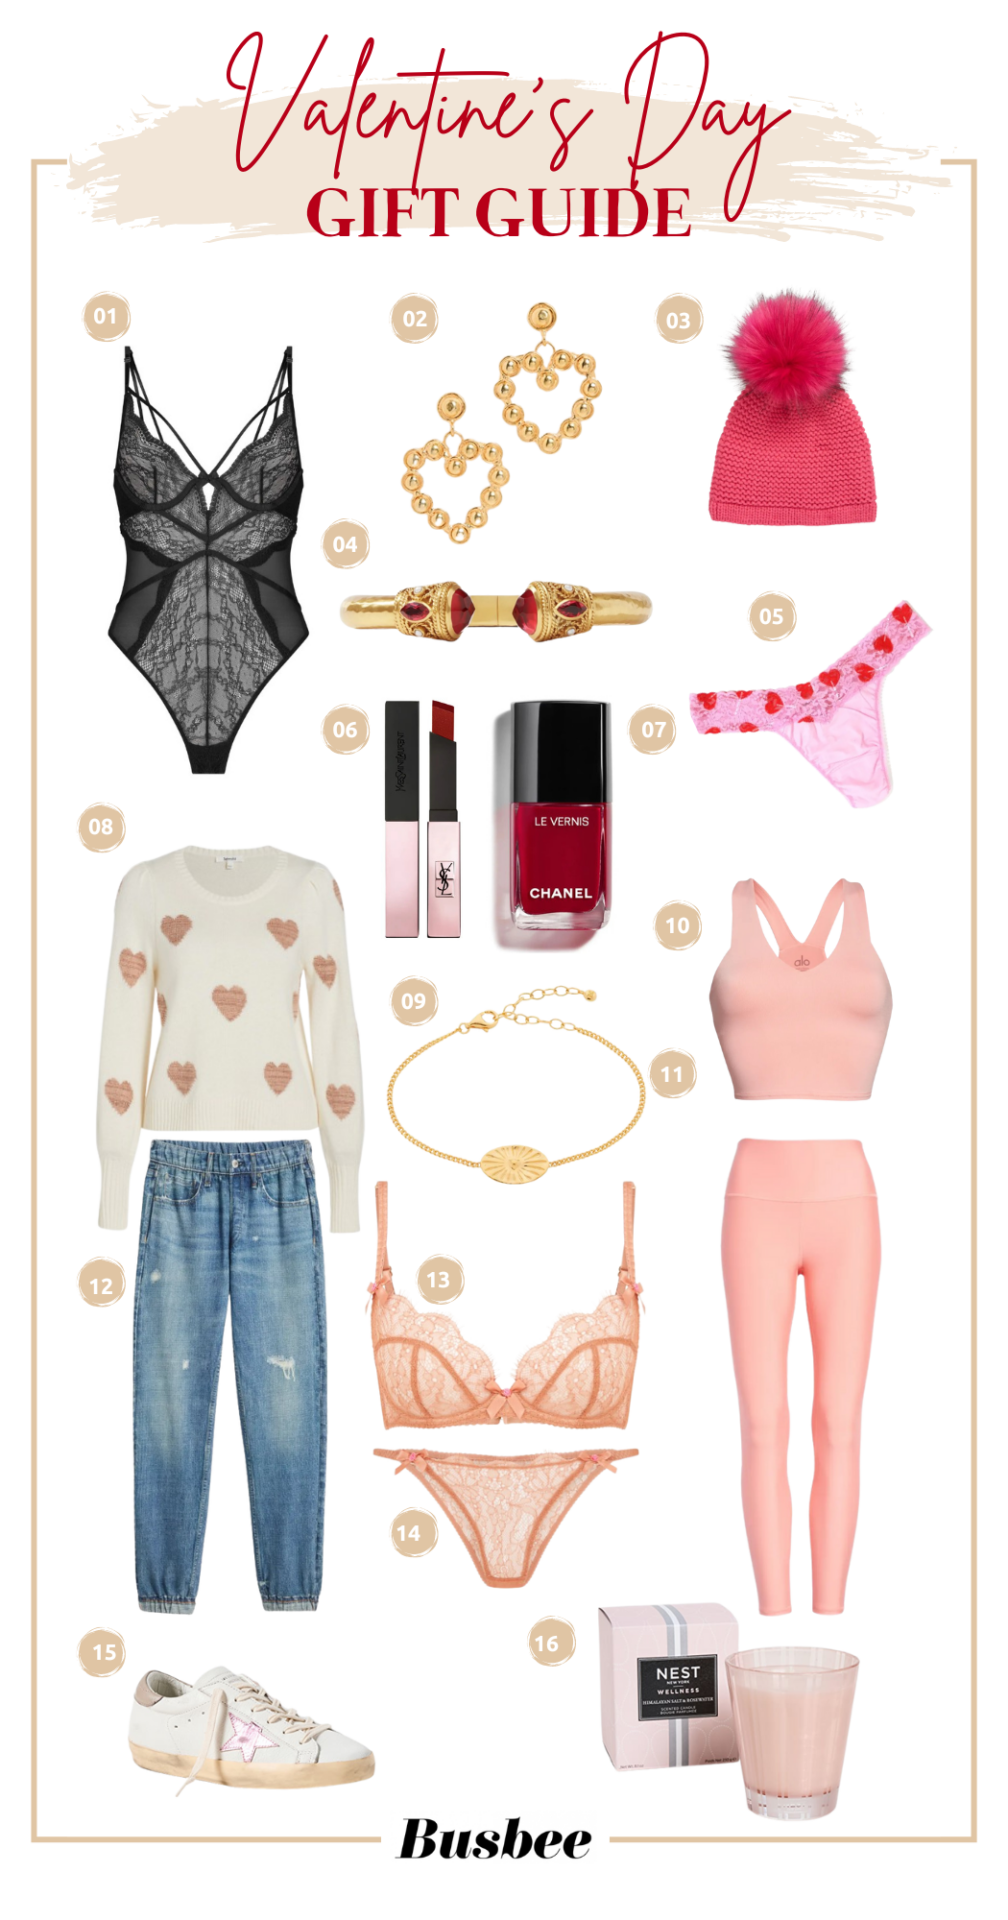 valentine's day gift ideas, what to wear valentine's day, lingerie for valentine's day, valentine's day gifts, galentine's day gift ideas, gifts for valentine, erin busbee, fashion blogger over 40, busbee style